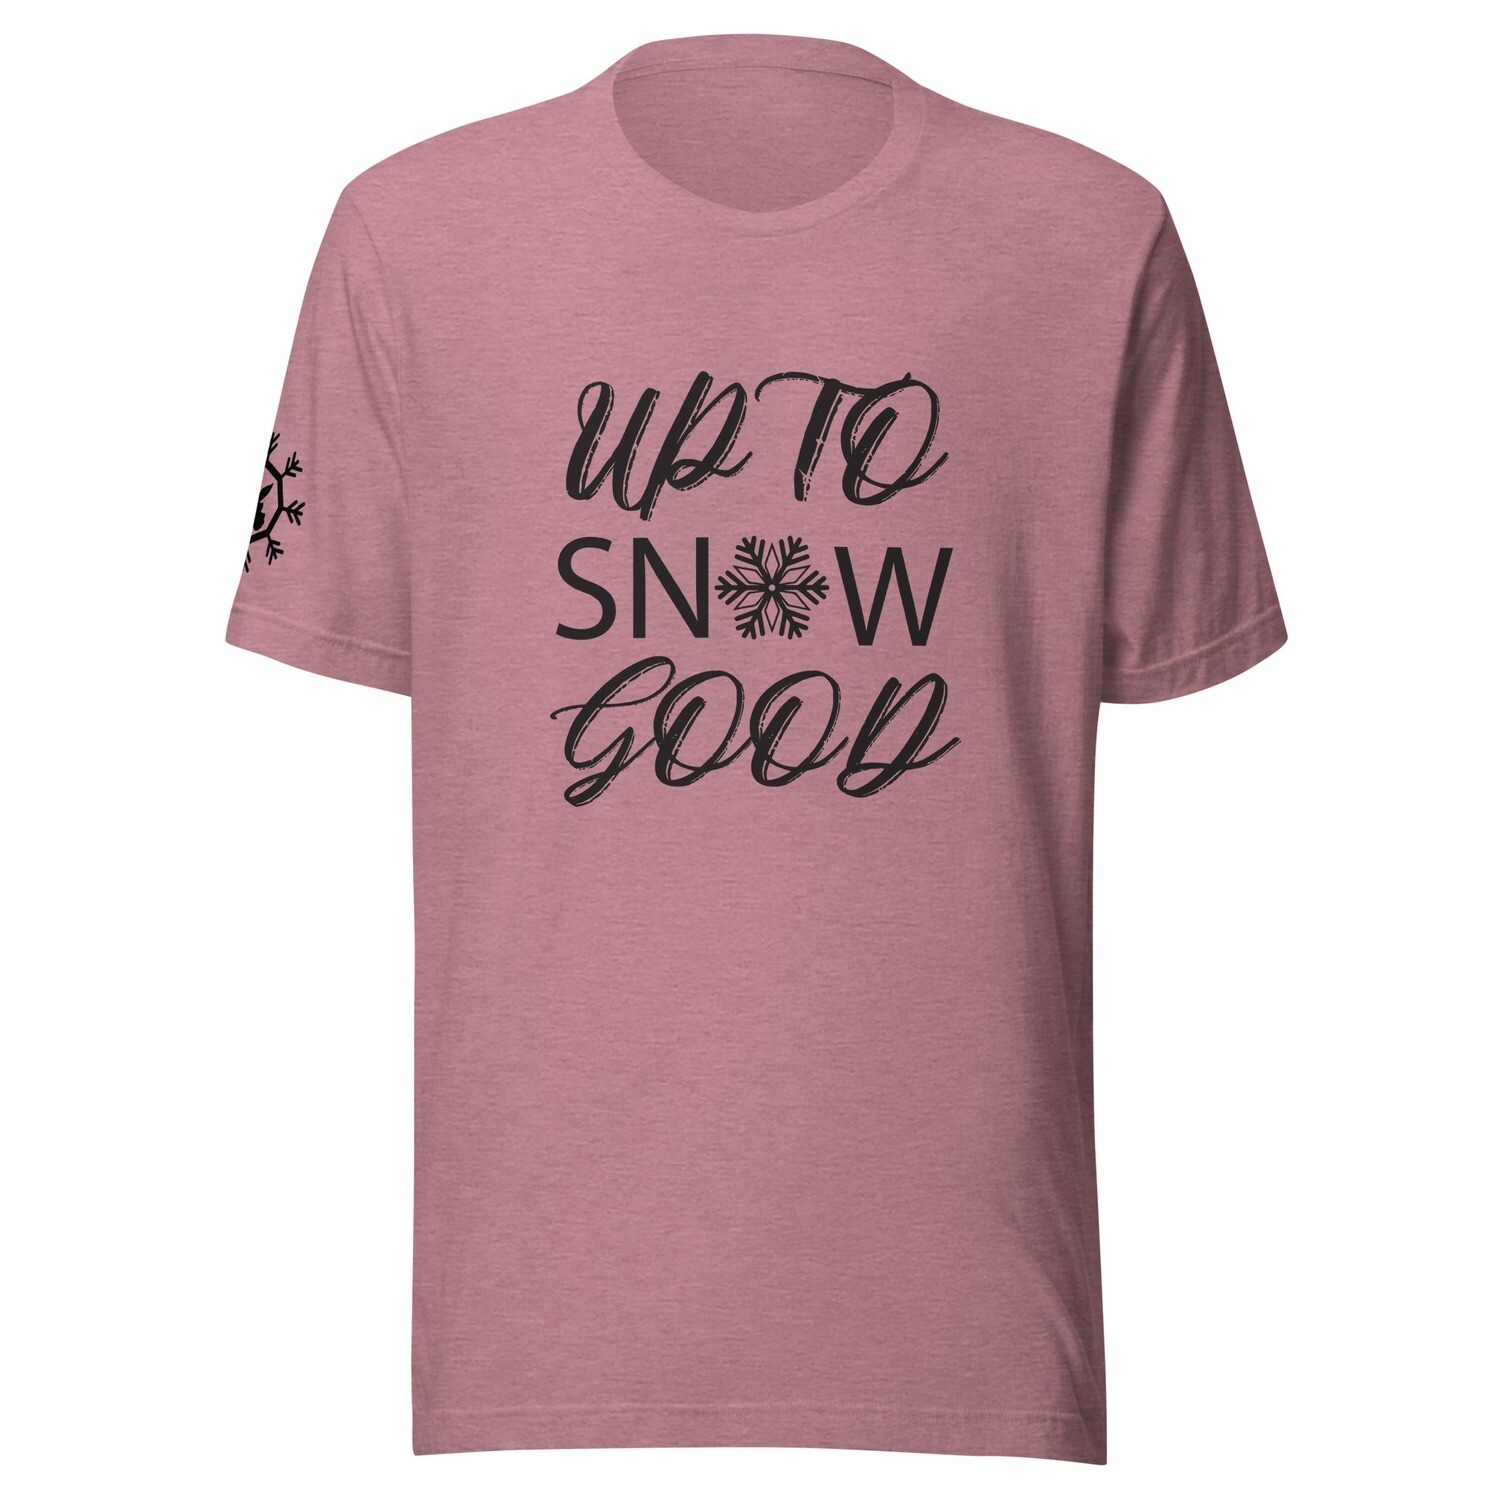 Up to Snow good Unisex t-shirt